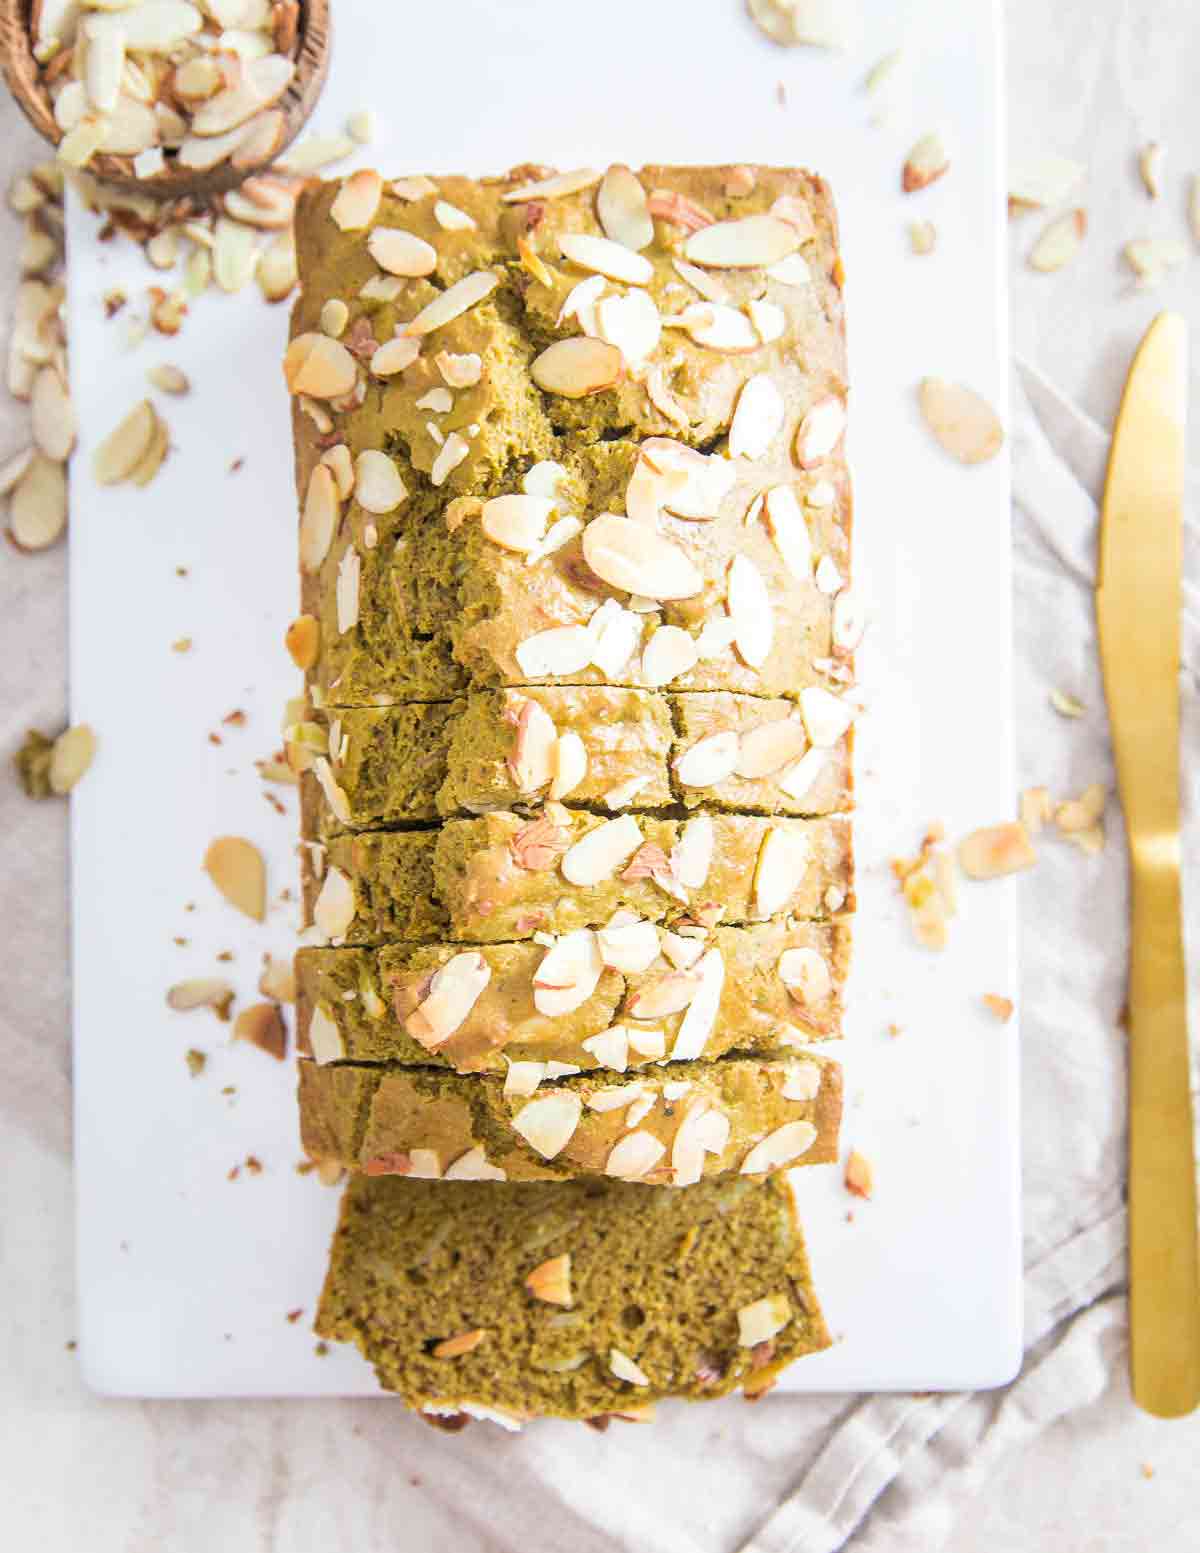 Matcha almond bread is moist, aromatic and flavorful all while boasting the health benefits of green tea powder.